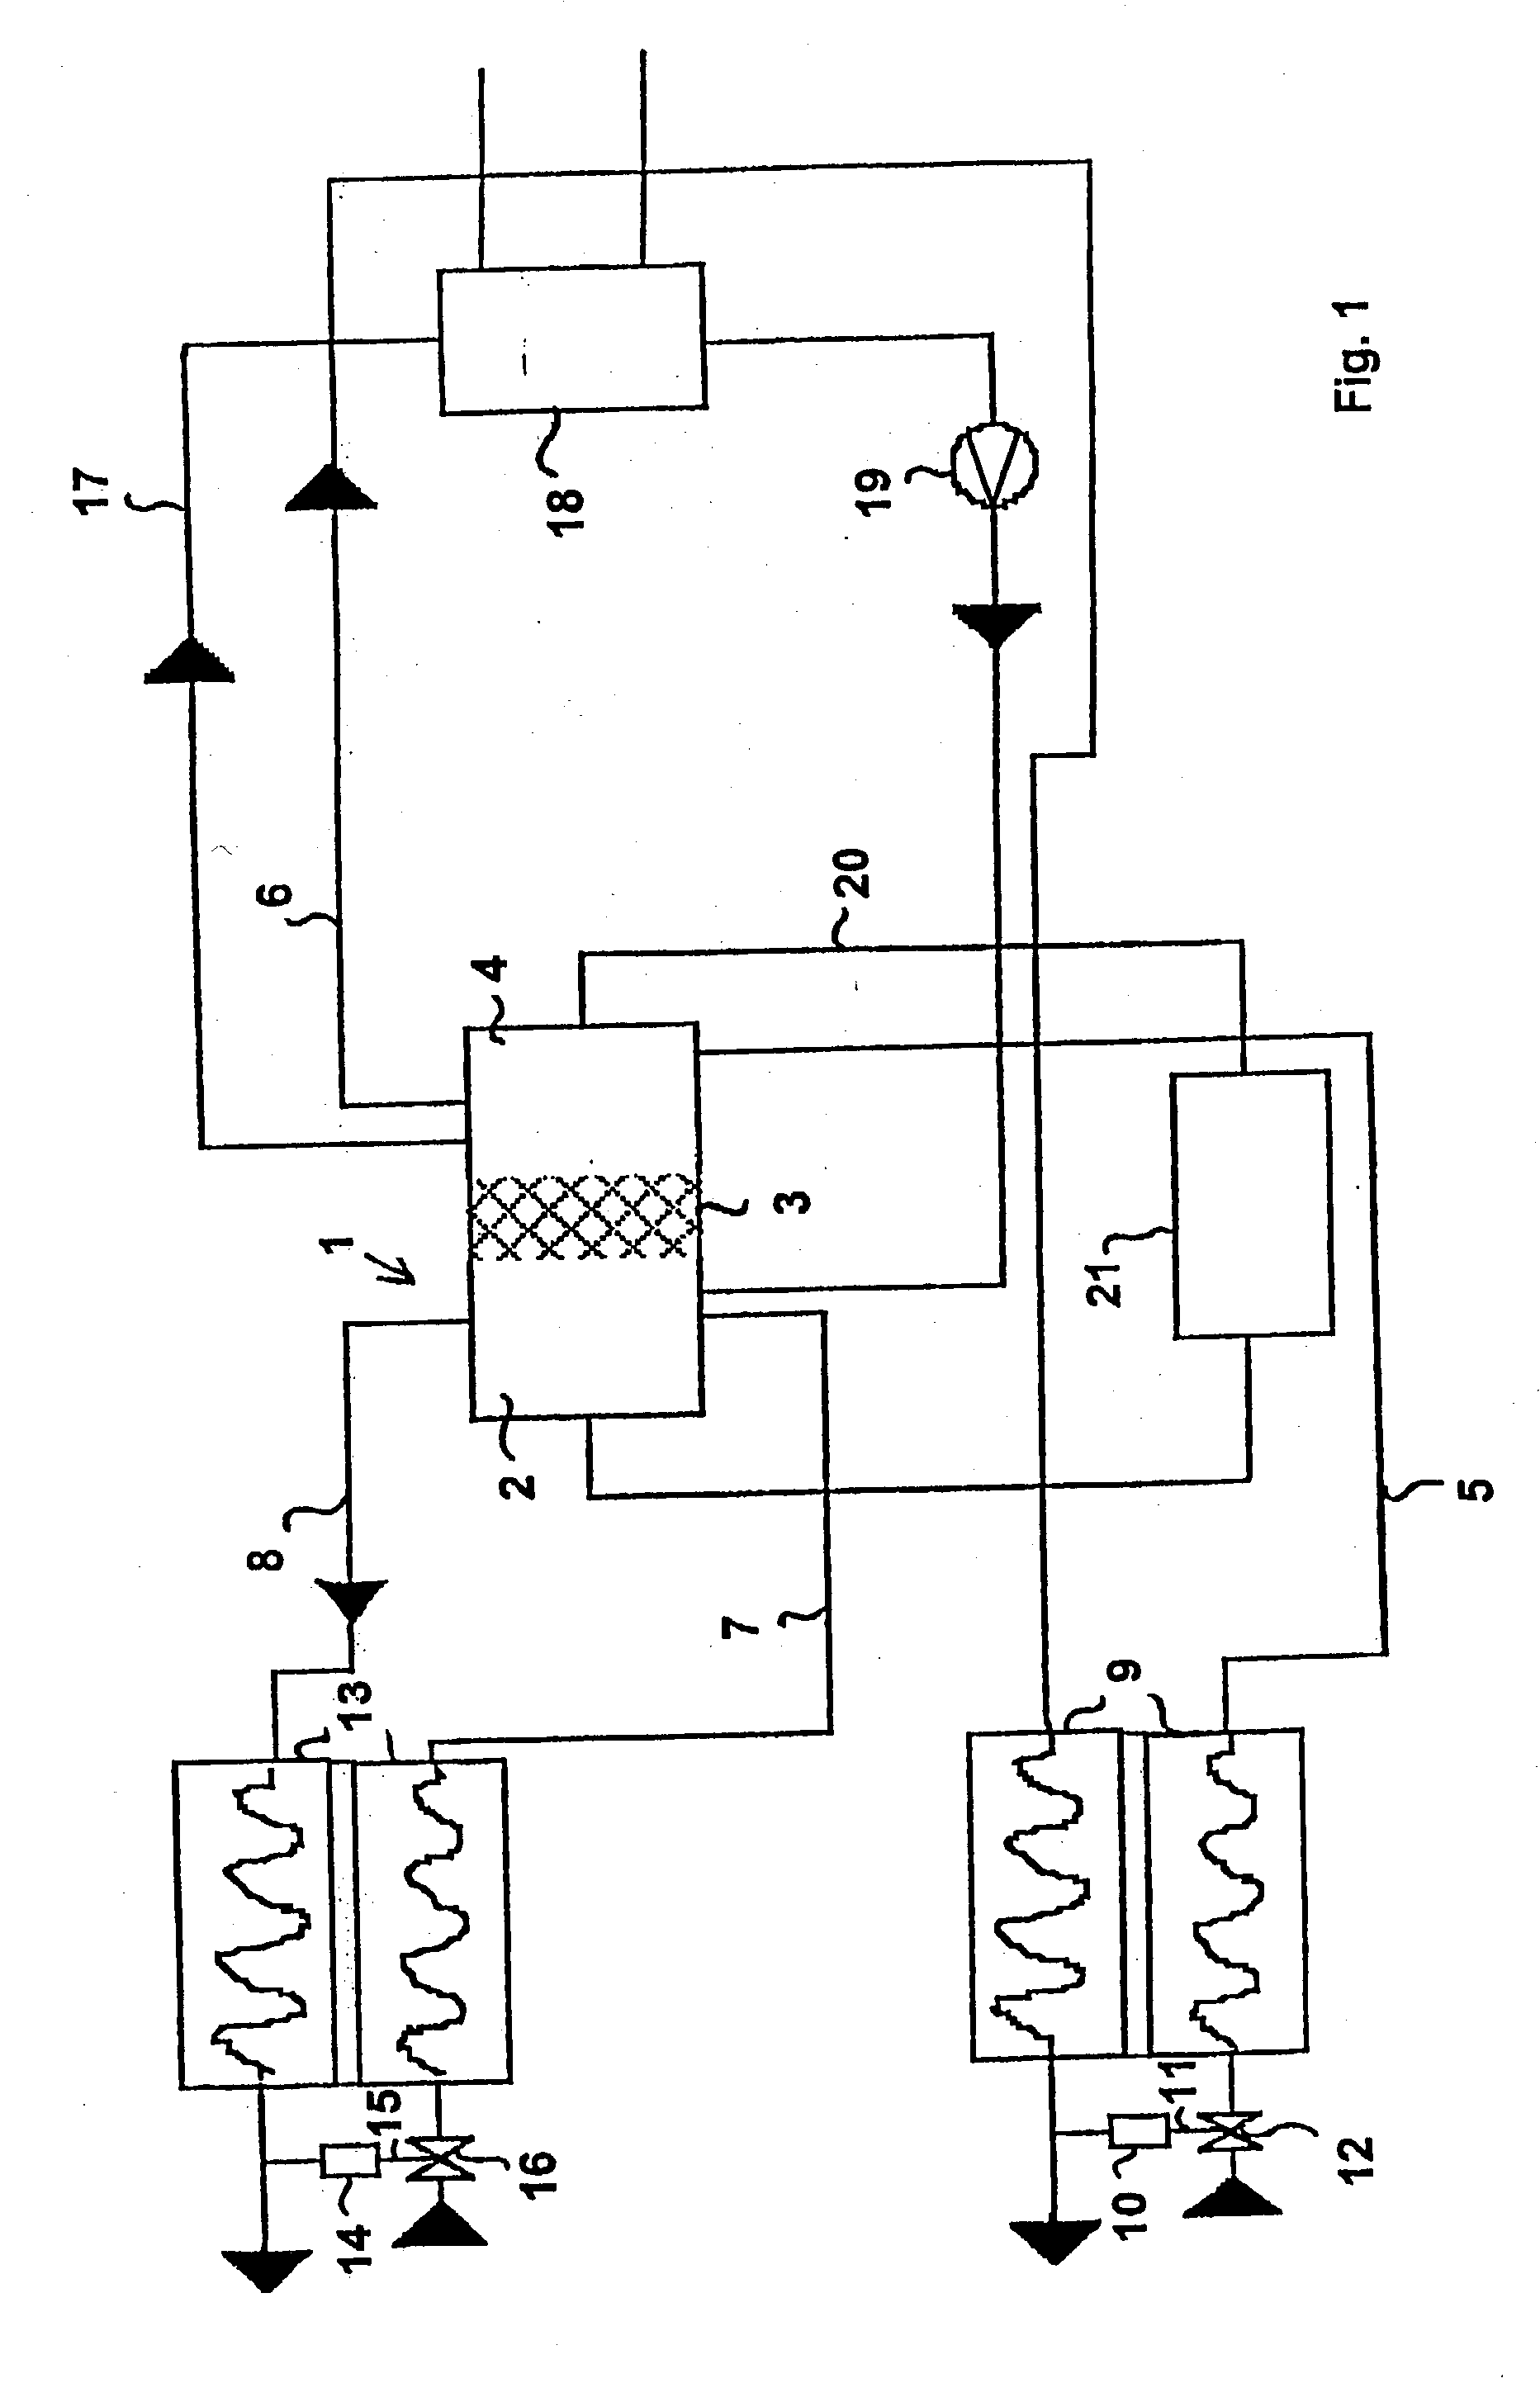 Fuel cells with integrated humidification and method for humidifying fuel cell process gas